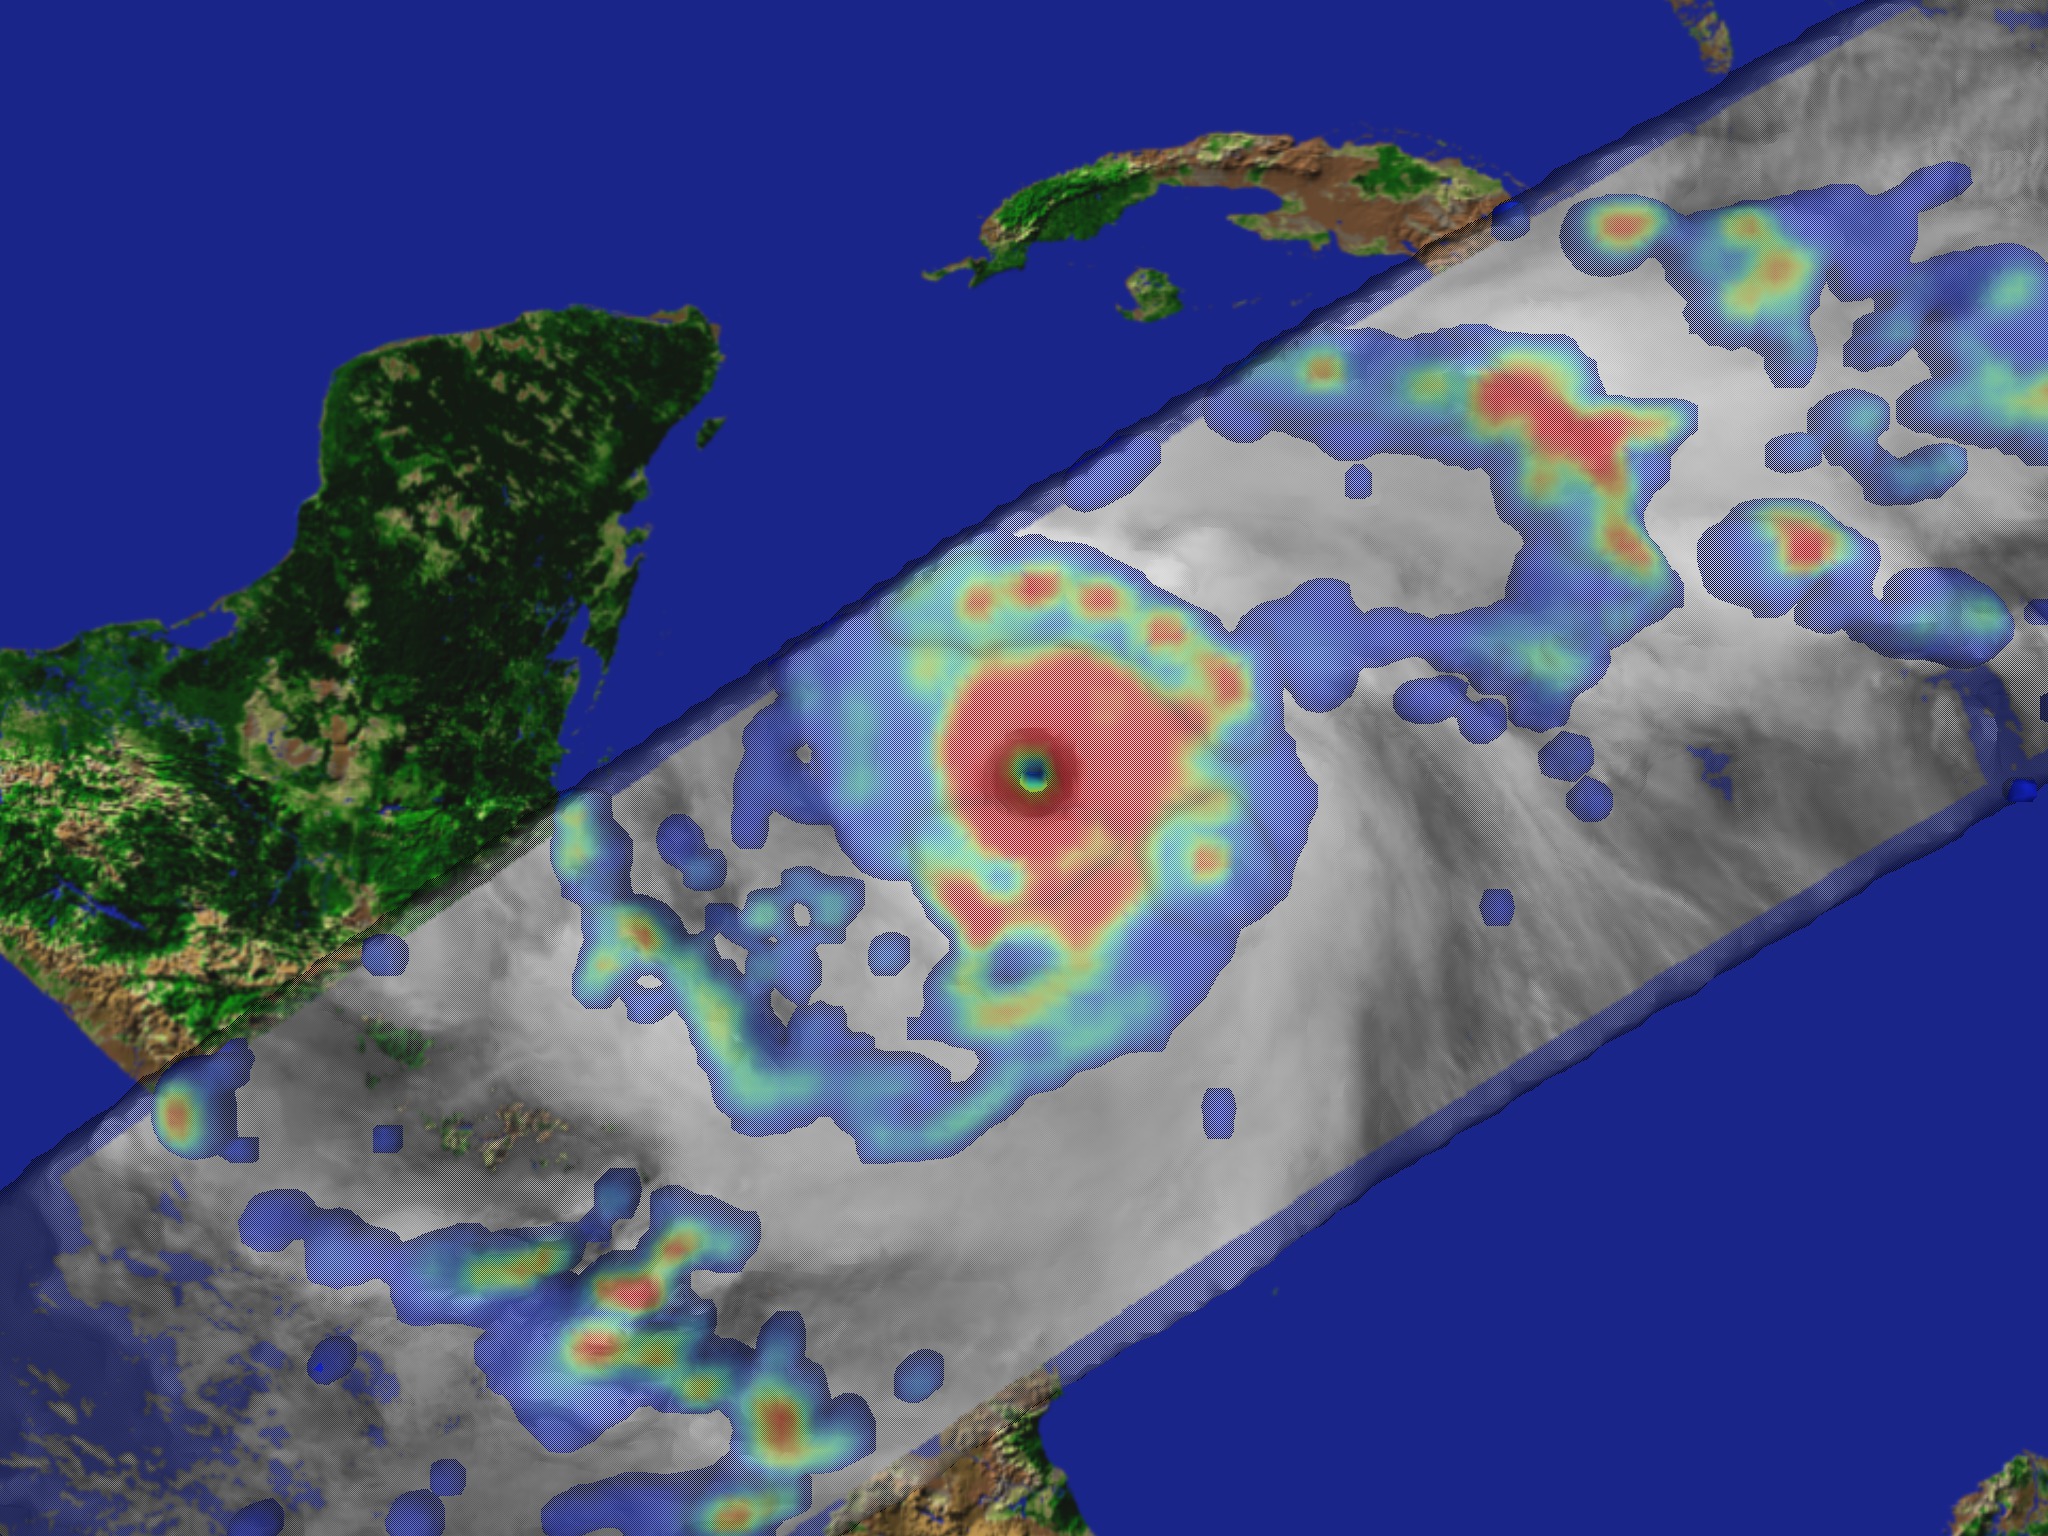 An infrared image of Hurricane Mitch superimposed on ground precipitation rates for Hurricane Mitch, from October 27, 1998.  Red represents regions of highest rainfall.